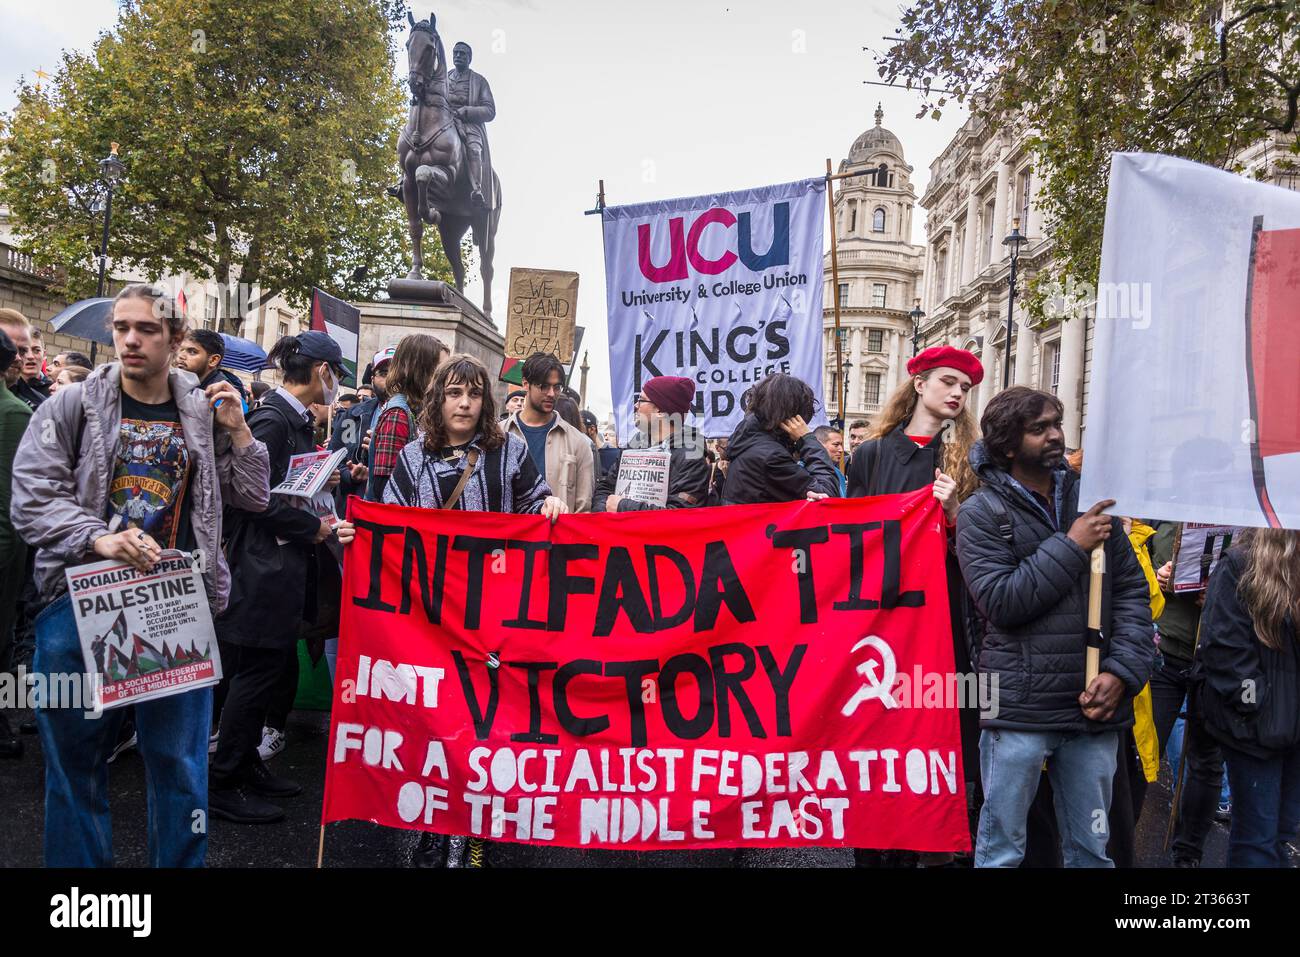 UCU King's College Union students with Intifada until Victory banner, Pro-Palestinian protest in Central London on 21/10/2023, England, UK Stock Photo